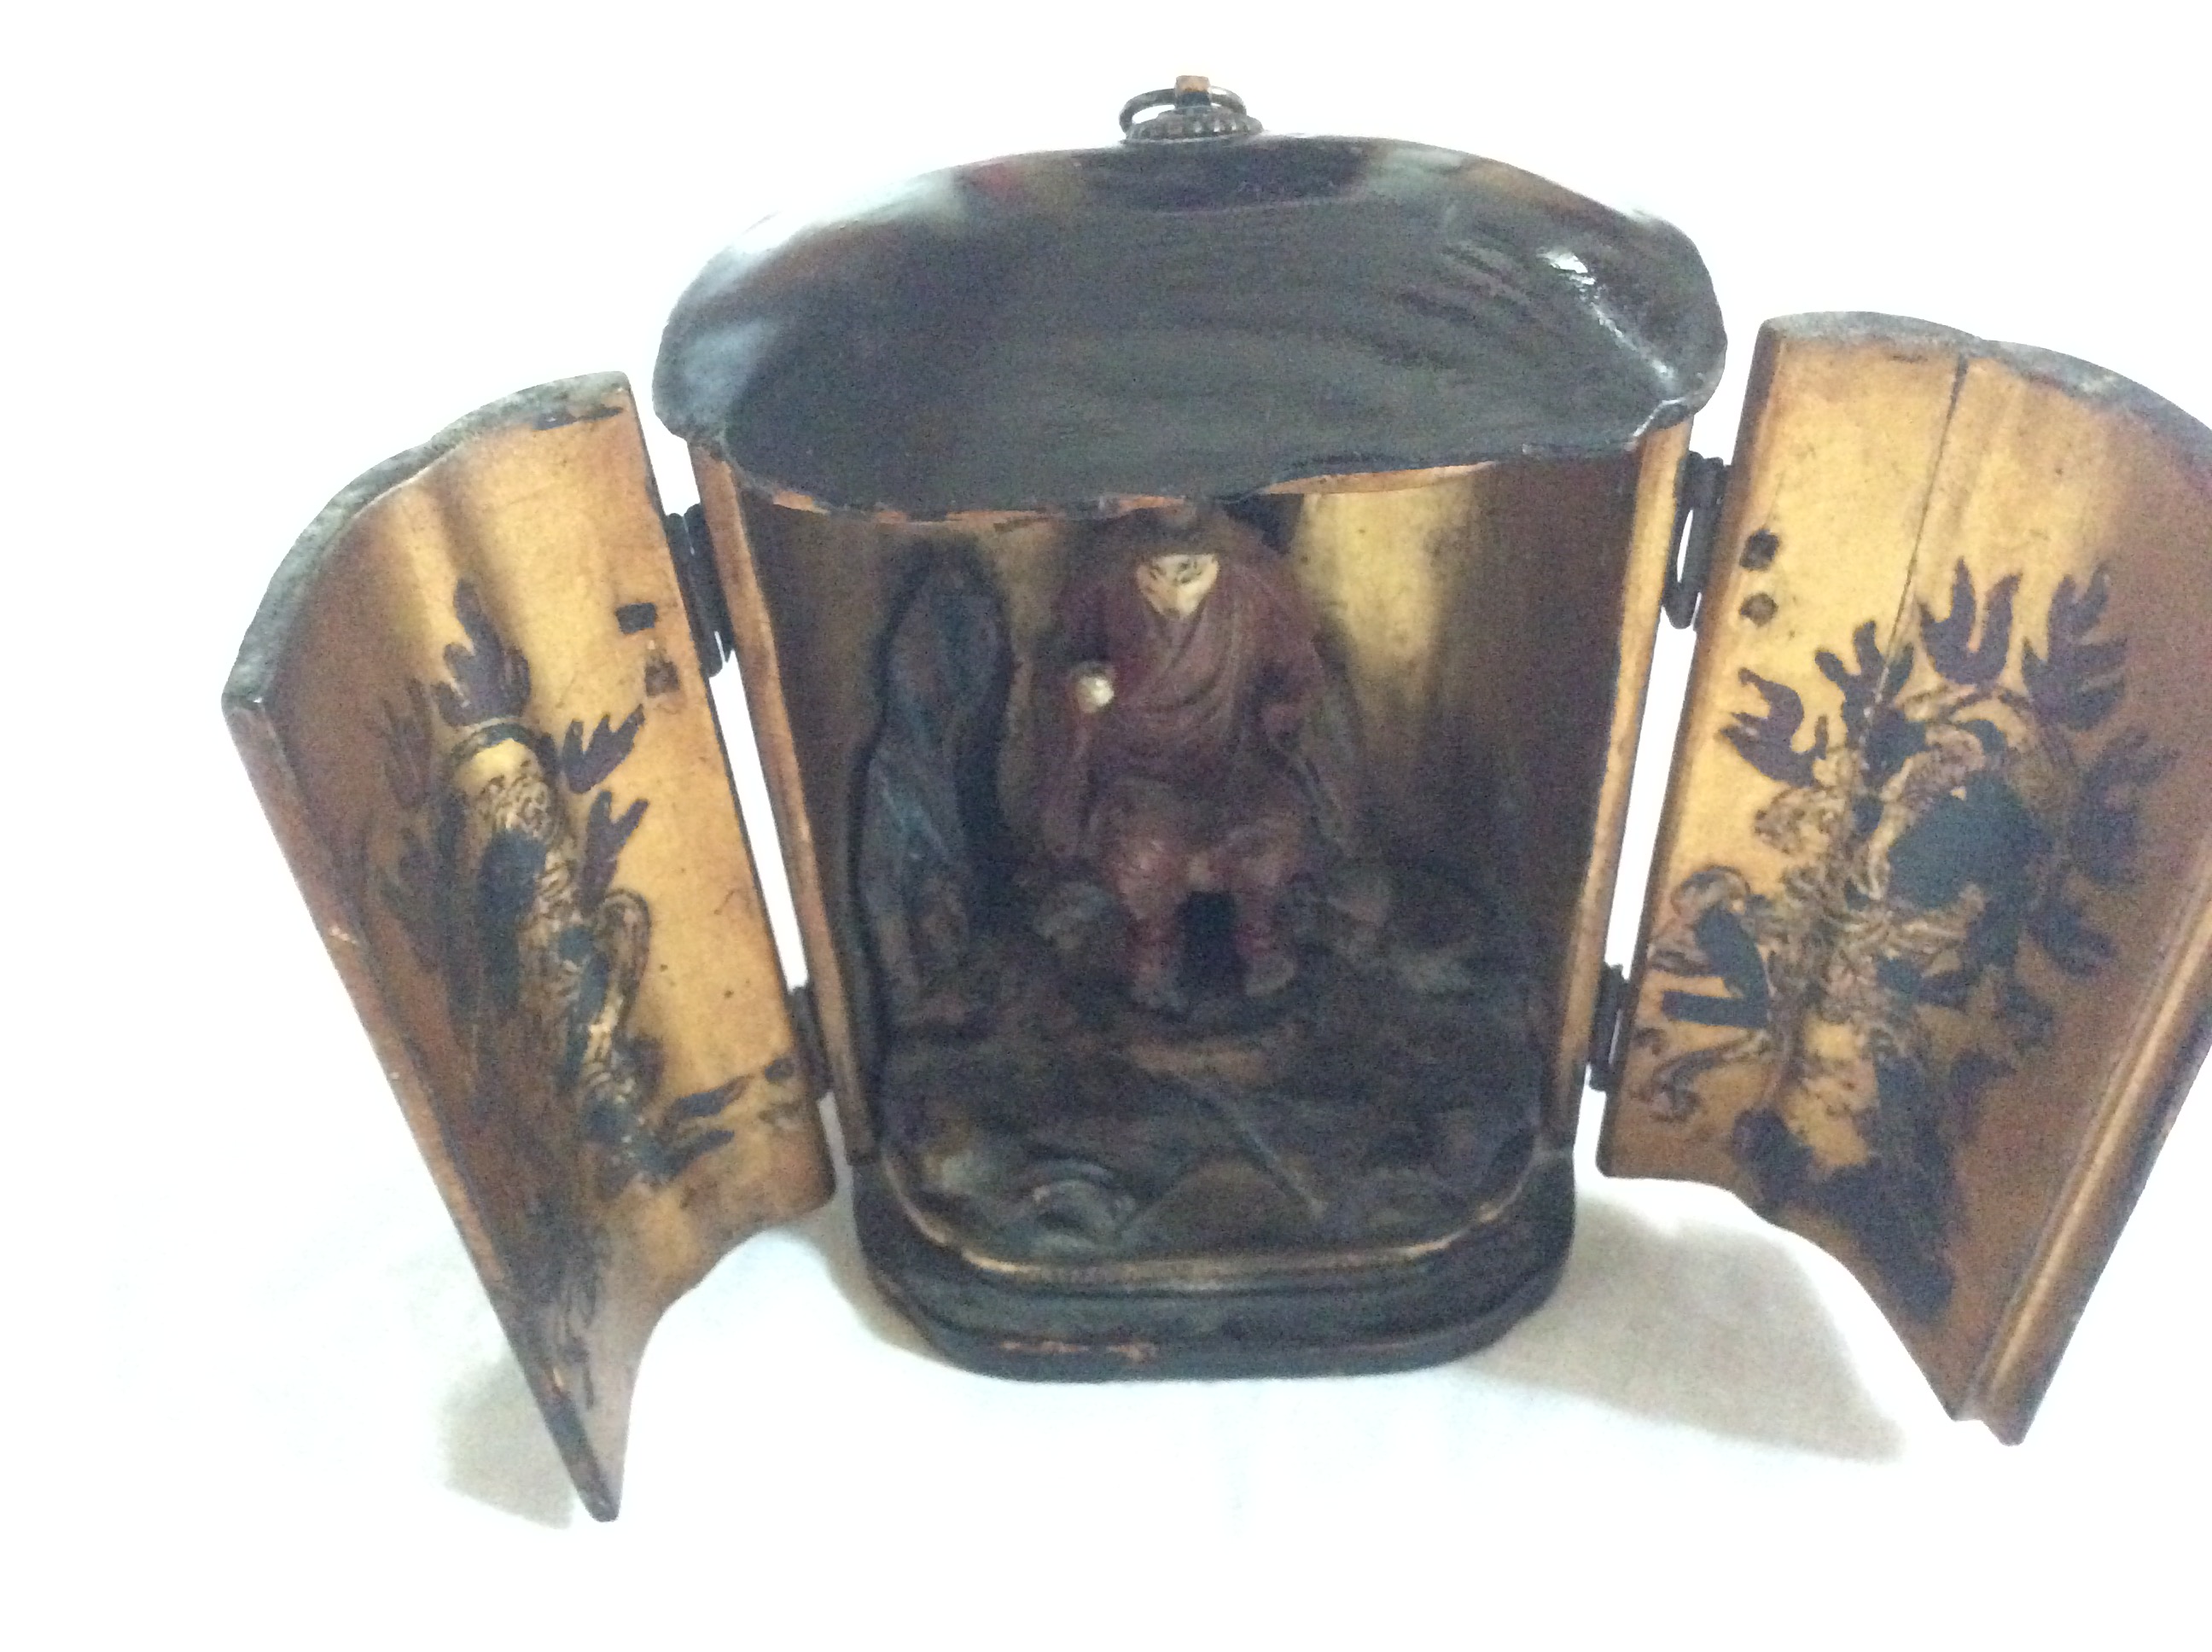 Genuine, Rare Antique Black Lacquer Chinese Traveling Shrine - Image 5 of 6